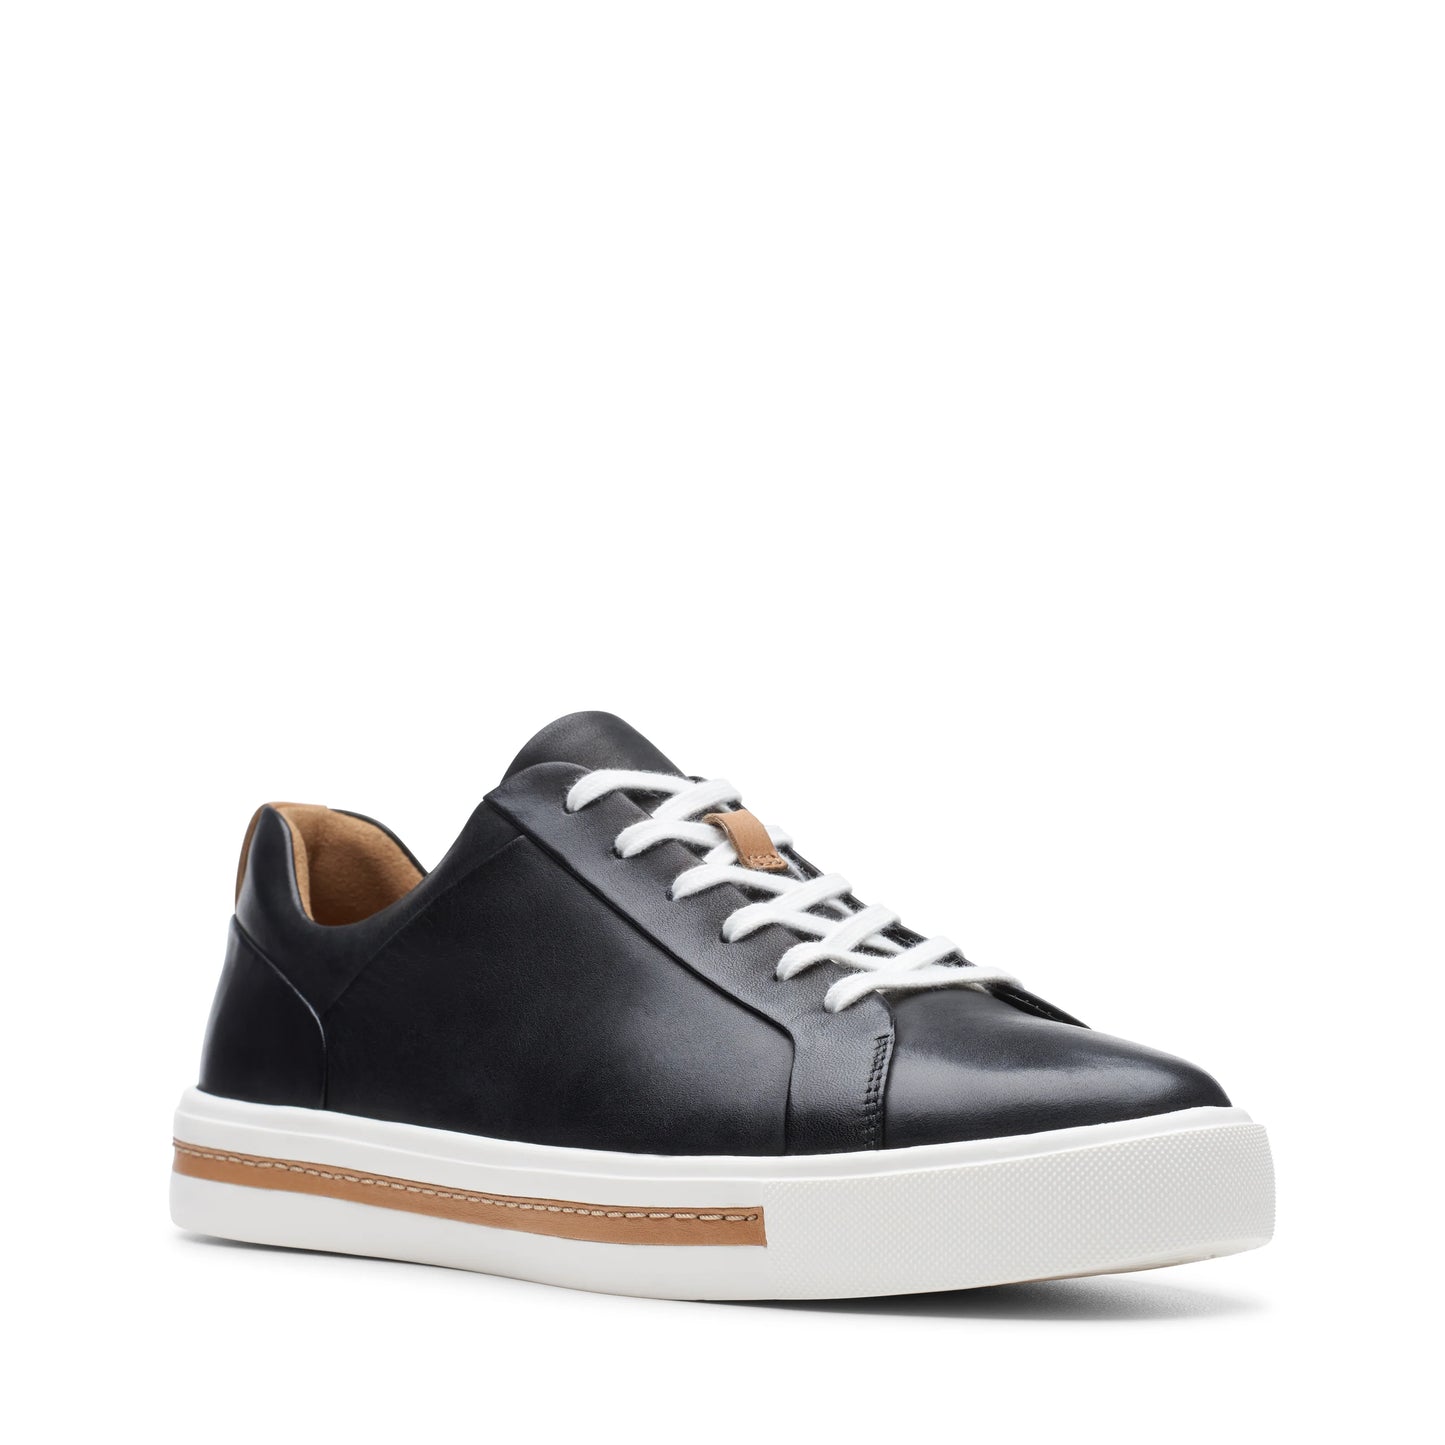 CLARKS | WOMAN SNEAKERS | A MAUI LACE BLACK LEATHER | BLACK 